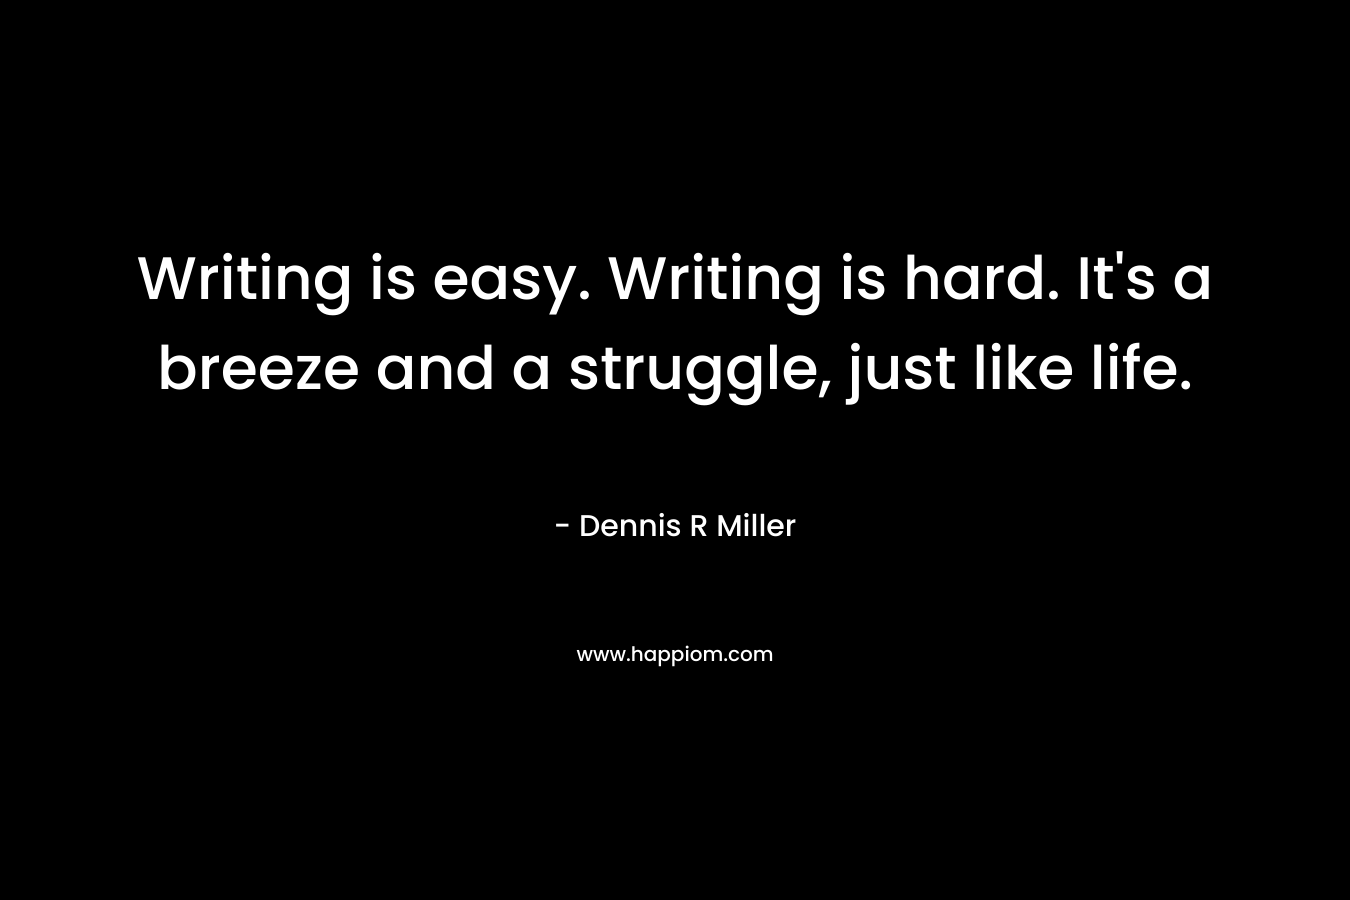 Writing is easy. Writing is hard. It's a breeze and a struggle, just like life.